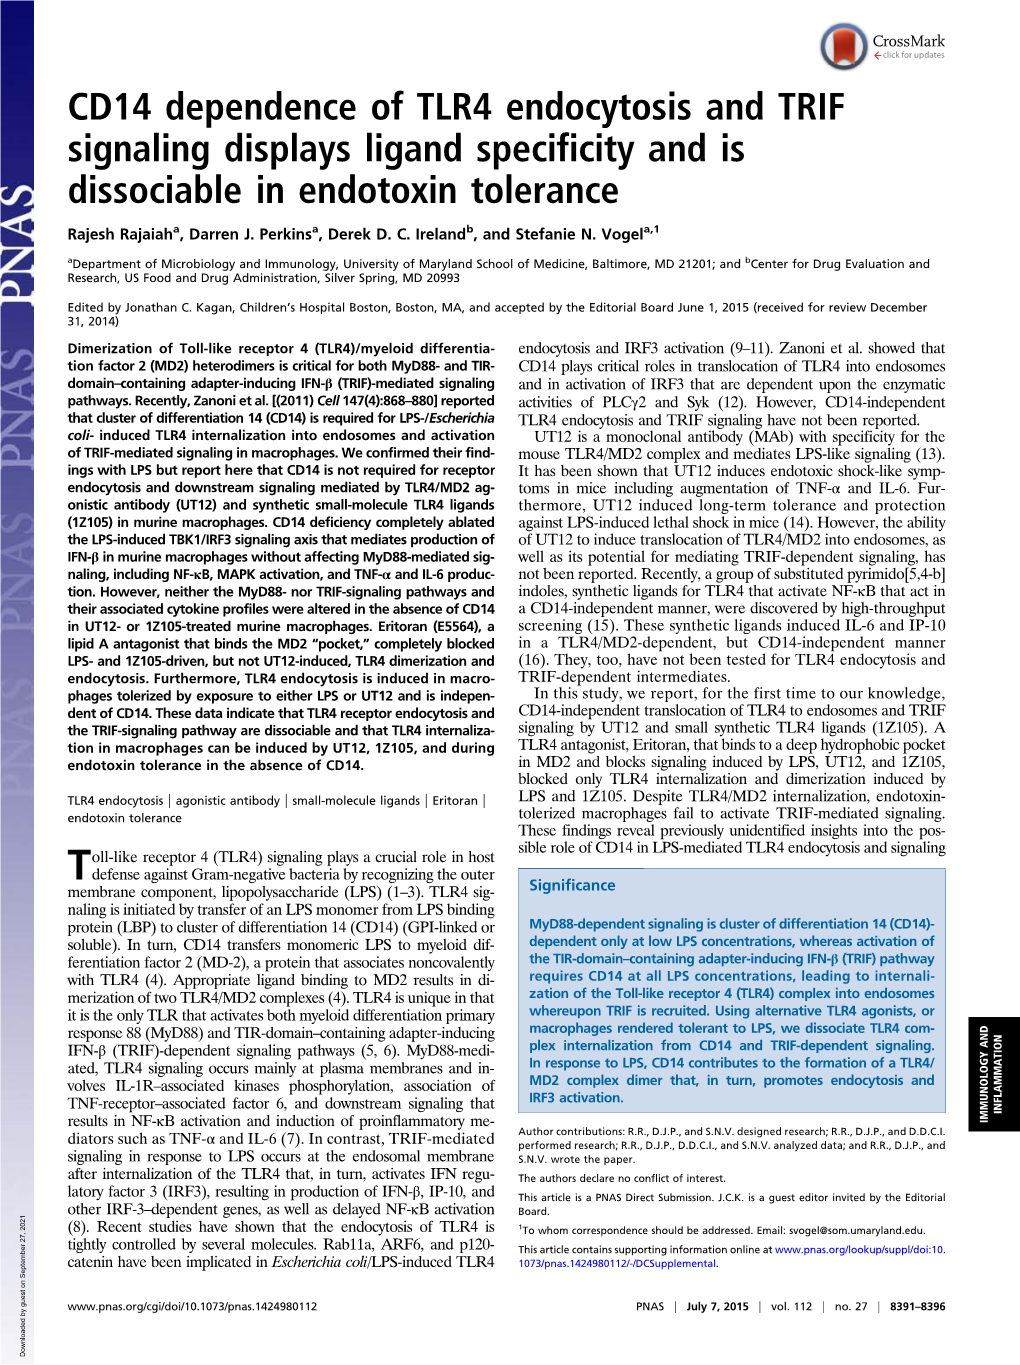 CD14 Dependence of TLR4 Endocytosis and TRIF Signaling Displays Ligand Specificity and Is Dissociable in Endotoxin Tolerance